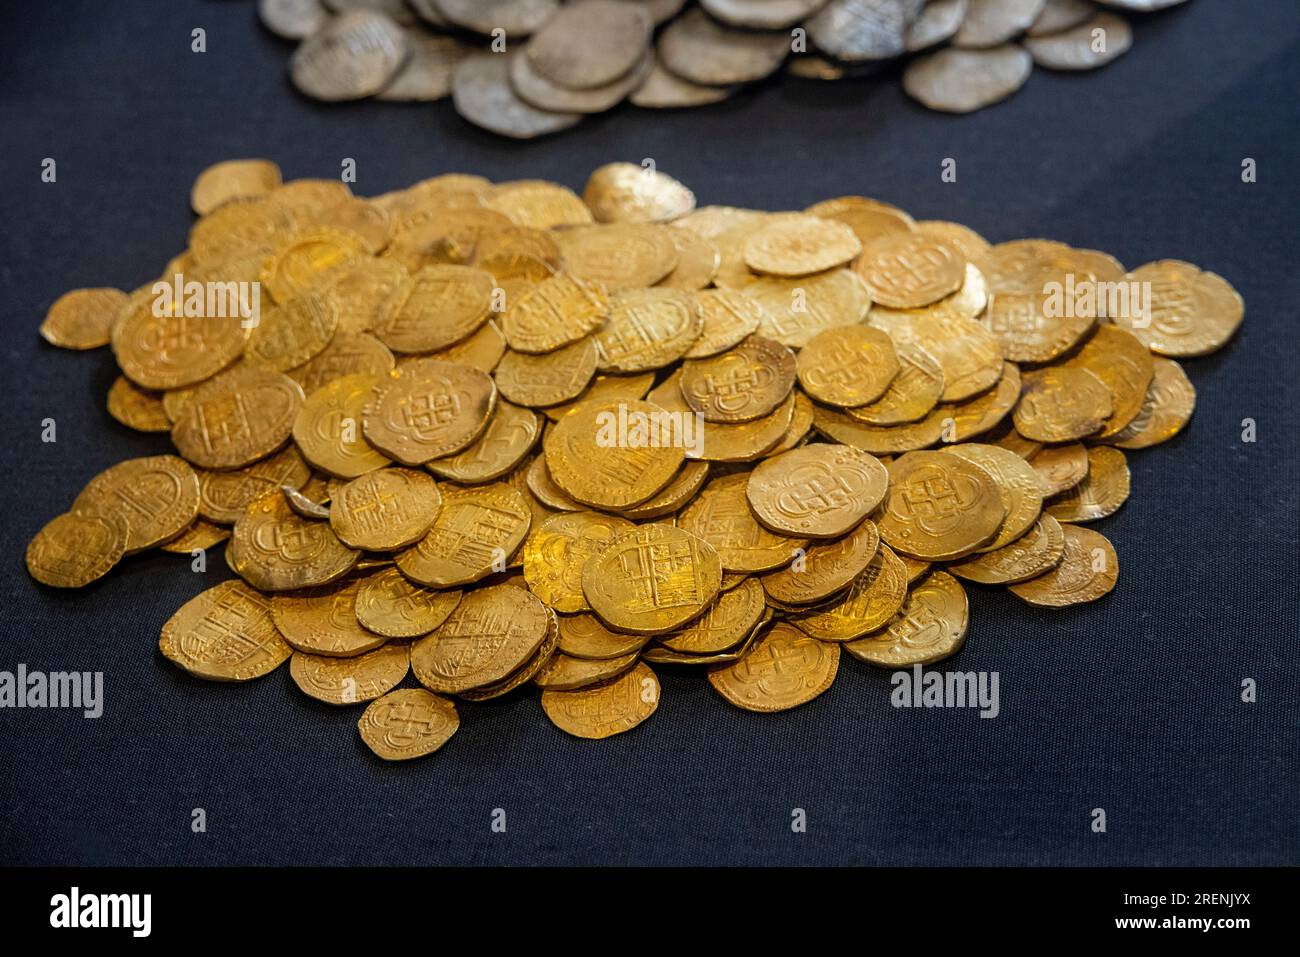 gold coins from the wreck of the Spanish Armada galleon La Girona, now ...